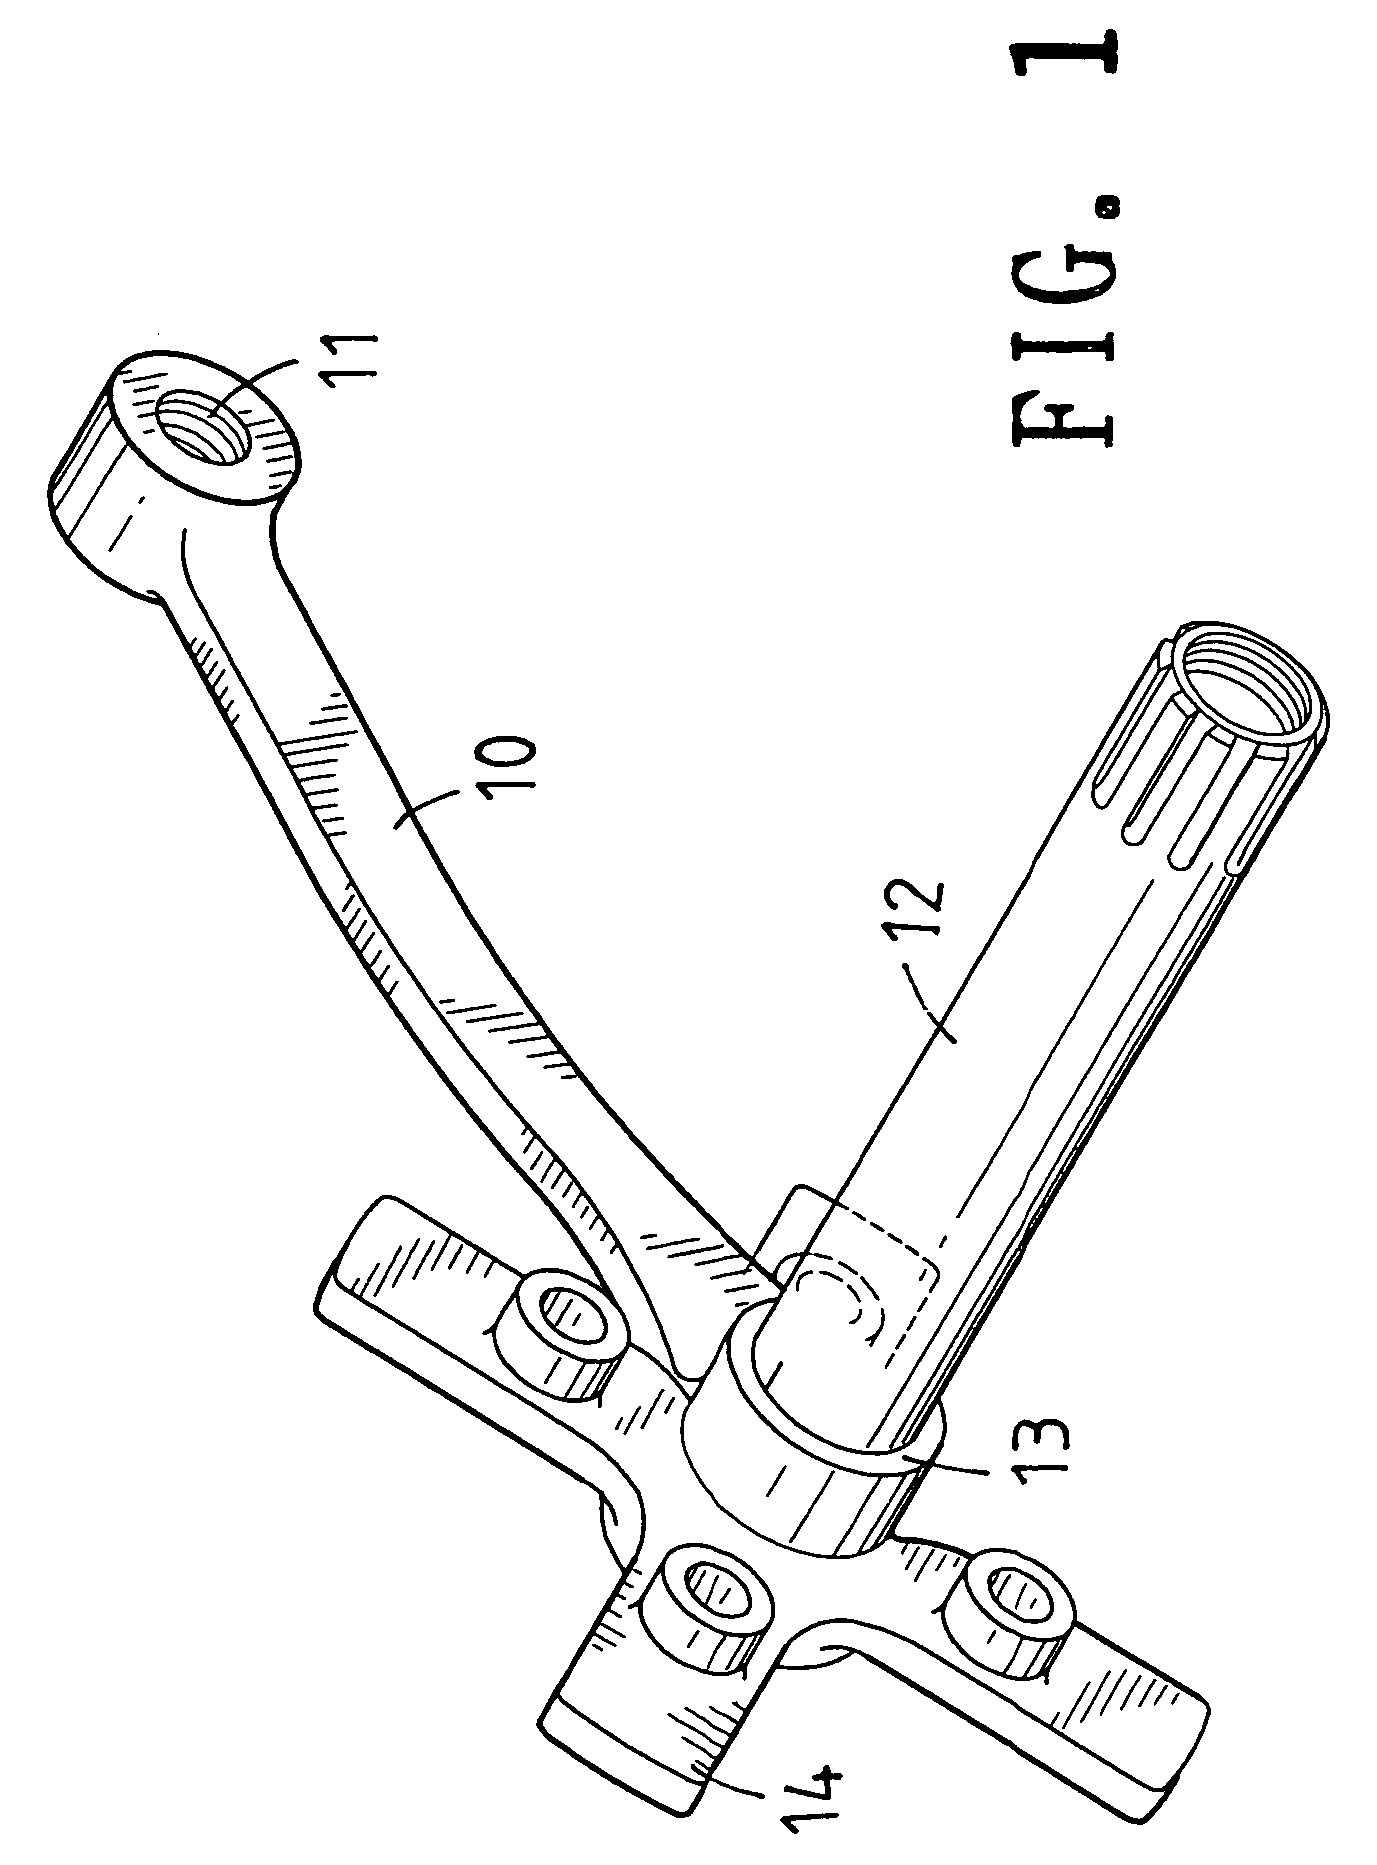 Crank structure of bicycle